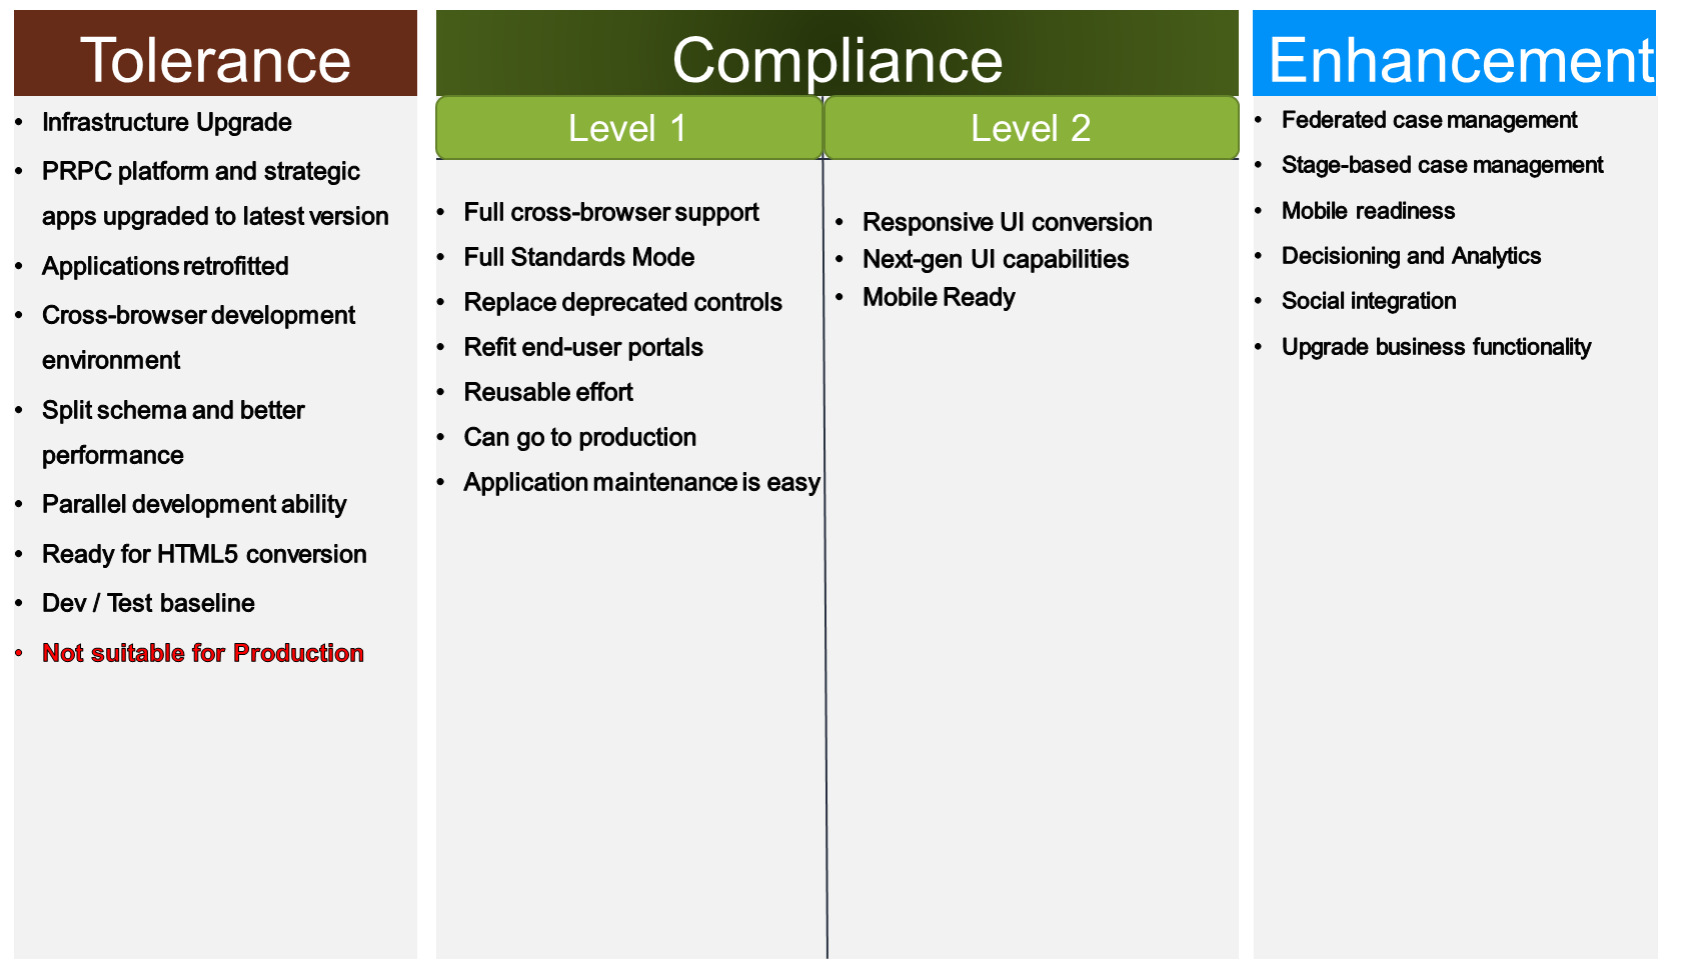  Tolerance, Compliance, and Enhancement upgrade types